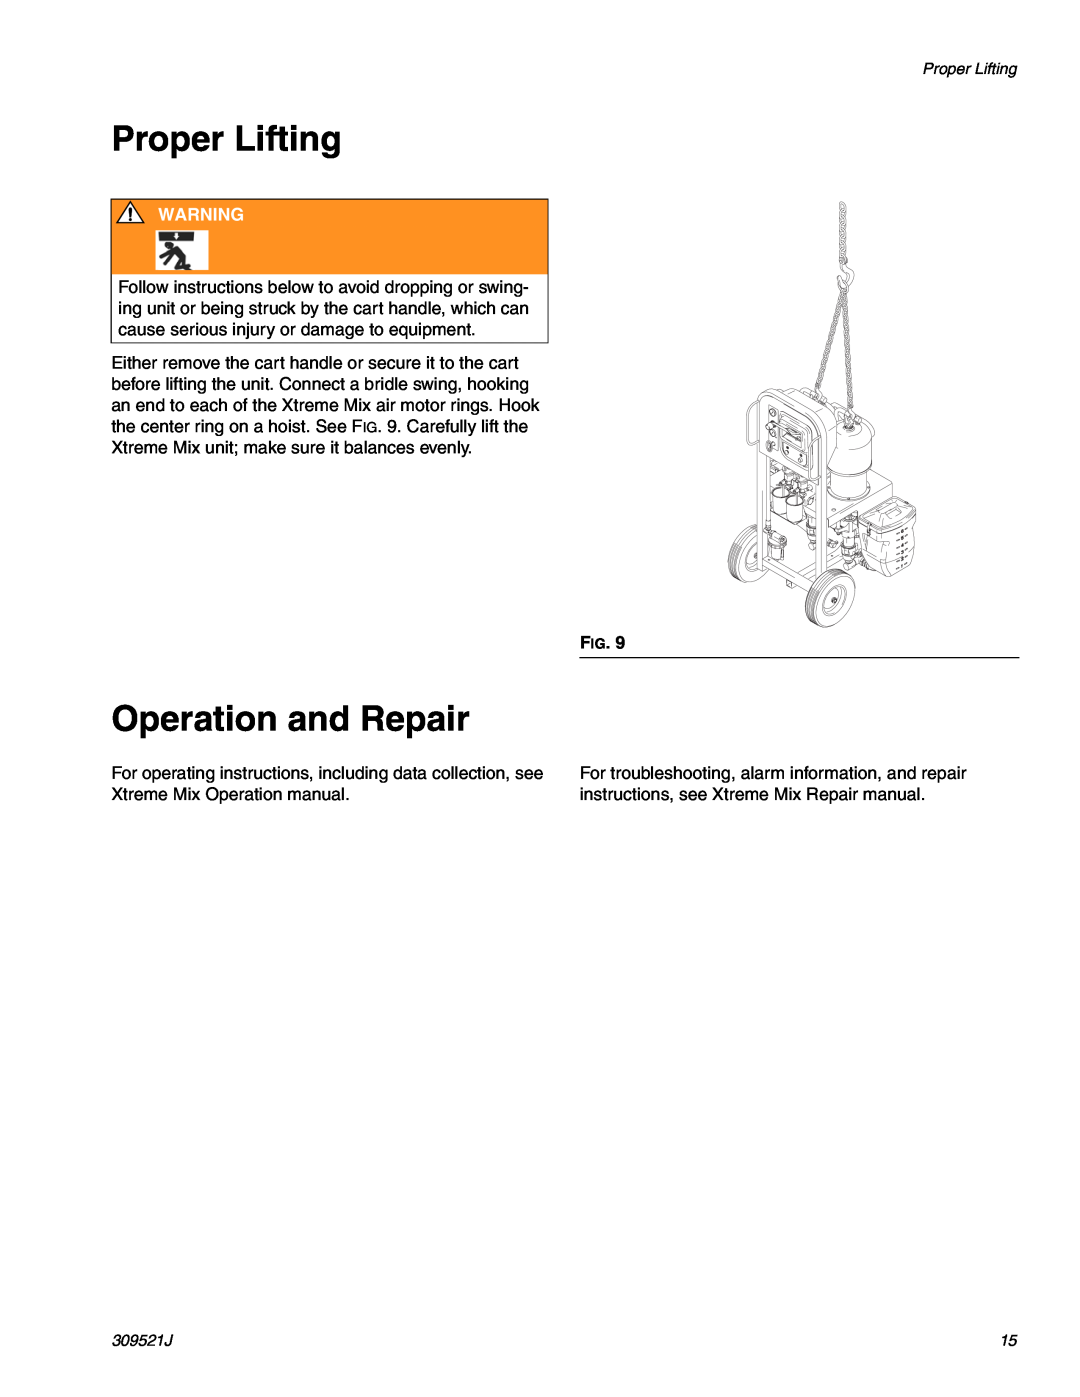 Hitachi 309521J important safety instructions Proper Lifting, Operation and Repair 